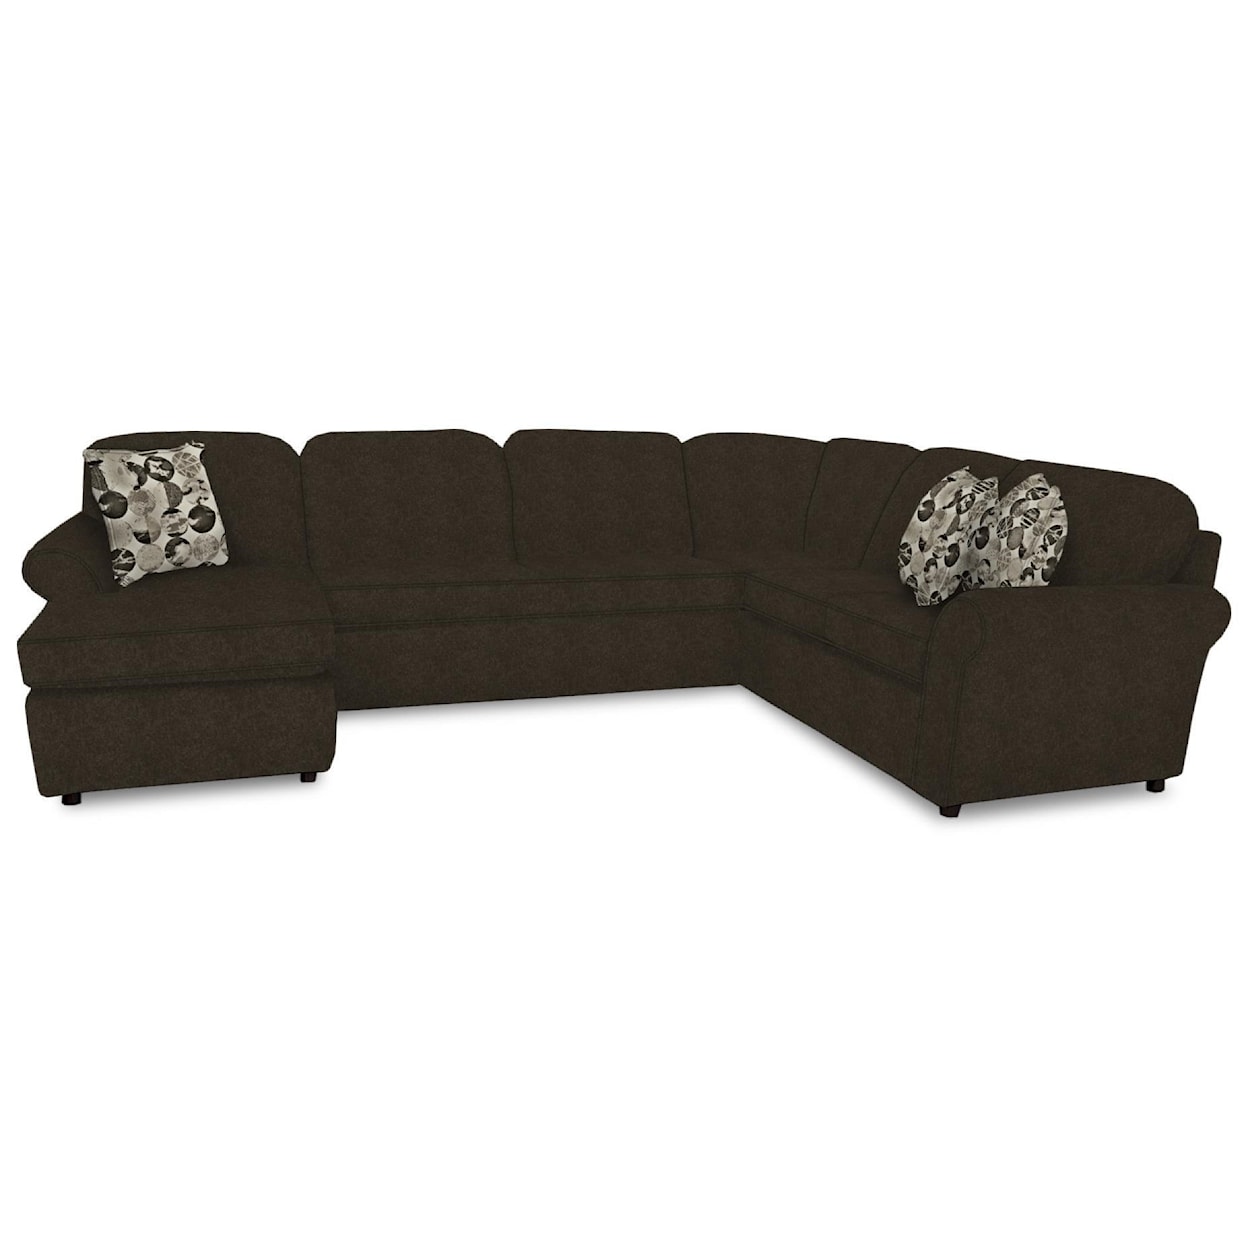 England Moonriver Sectional with Chaise